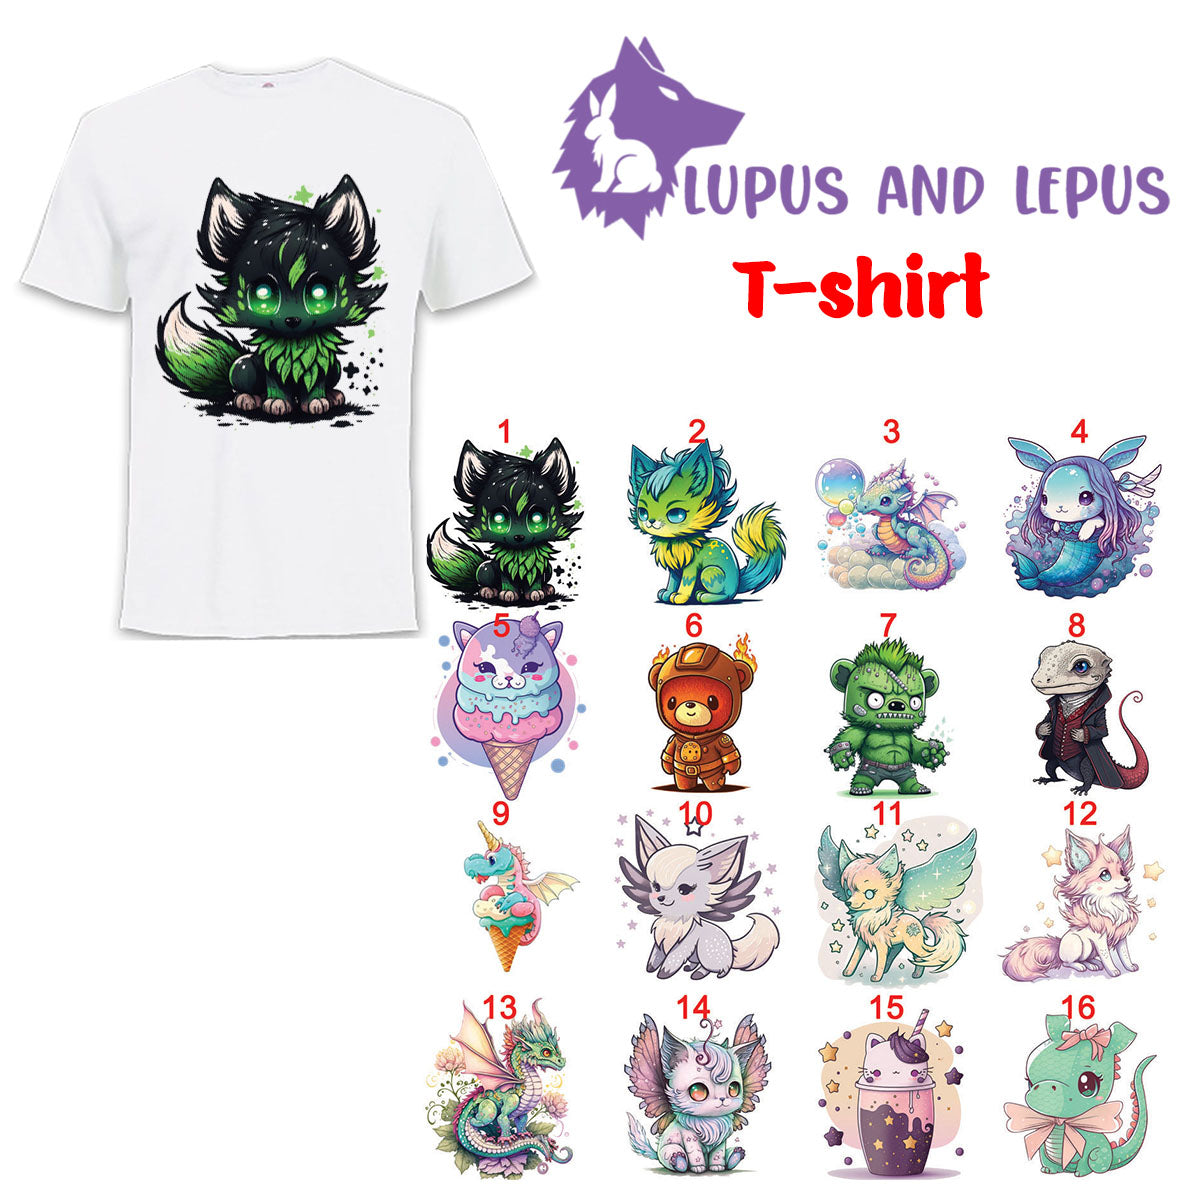 WHITE polyester sublimation tshirt (B)- adult , adult sizes, my art, my designs, dragon, dragons, bunny, cat, kitty, books, nerd, neardy, geek, gamer, game,  sublimated by me